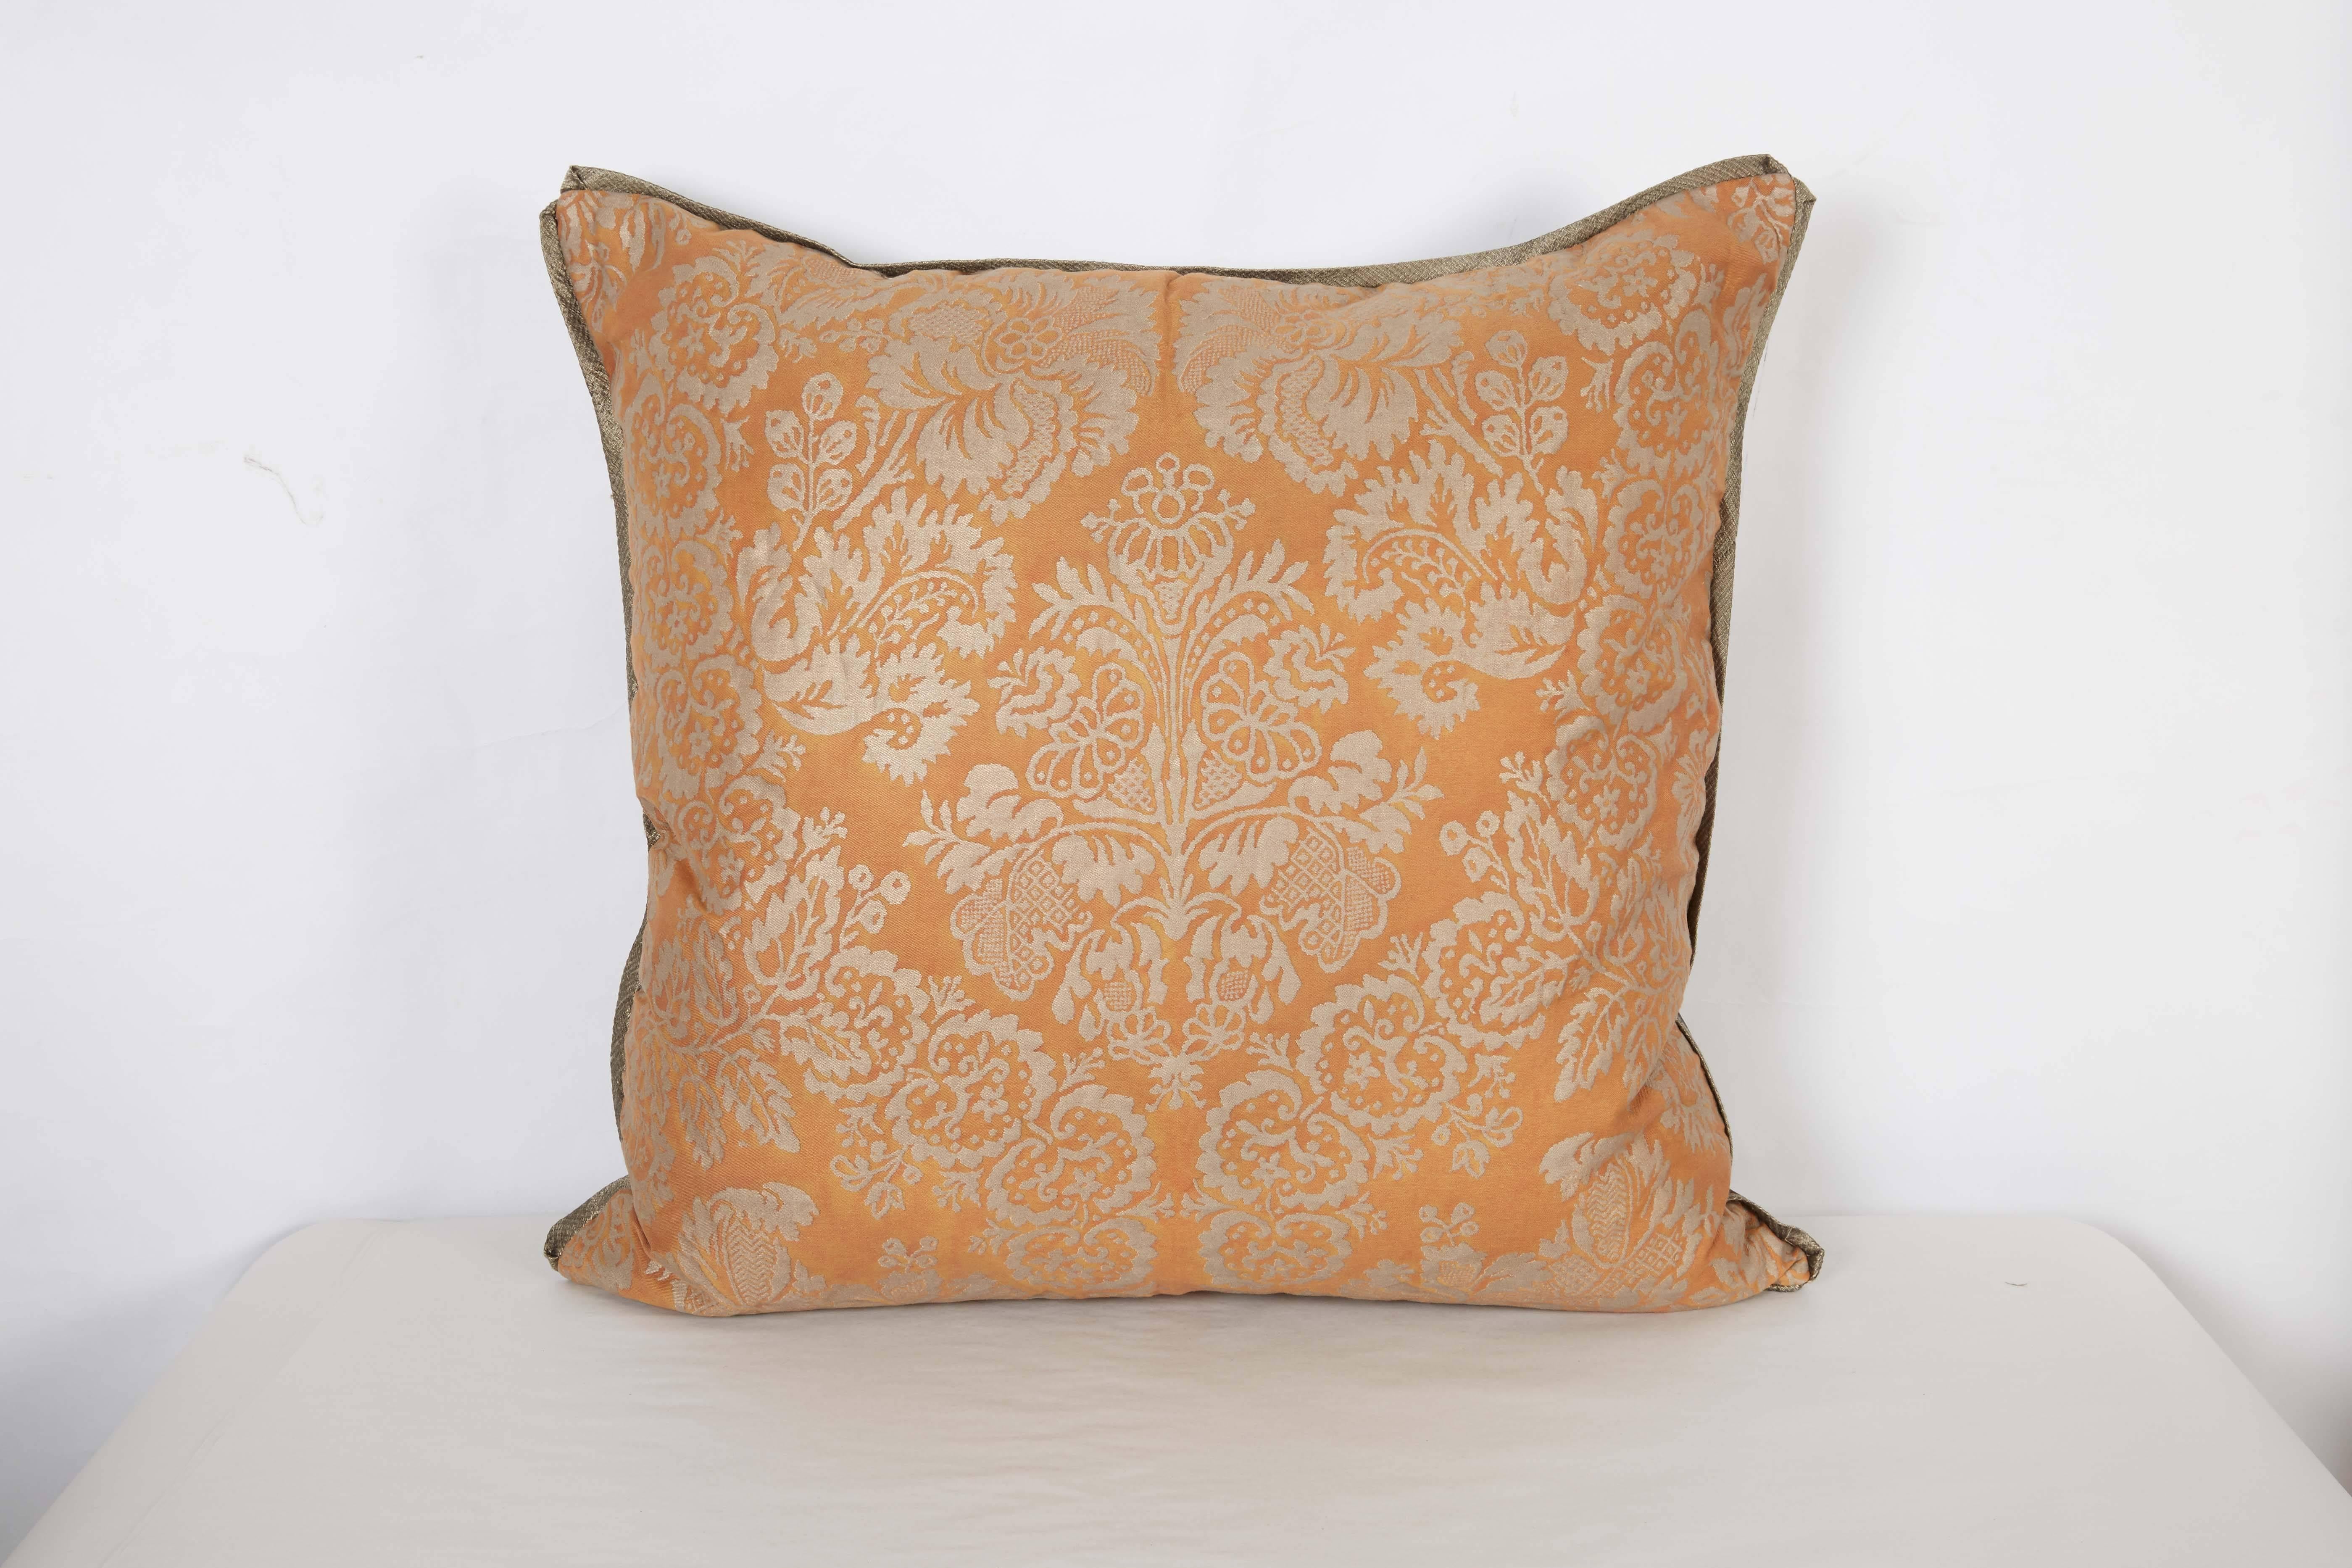 Baroque A Pair of Fortuny Fabric Cushions in the Solimena Pattern